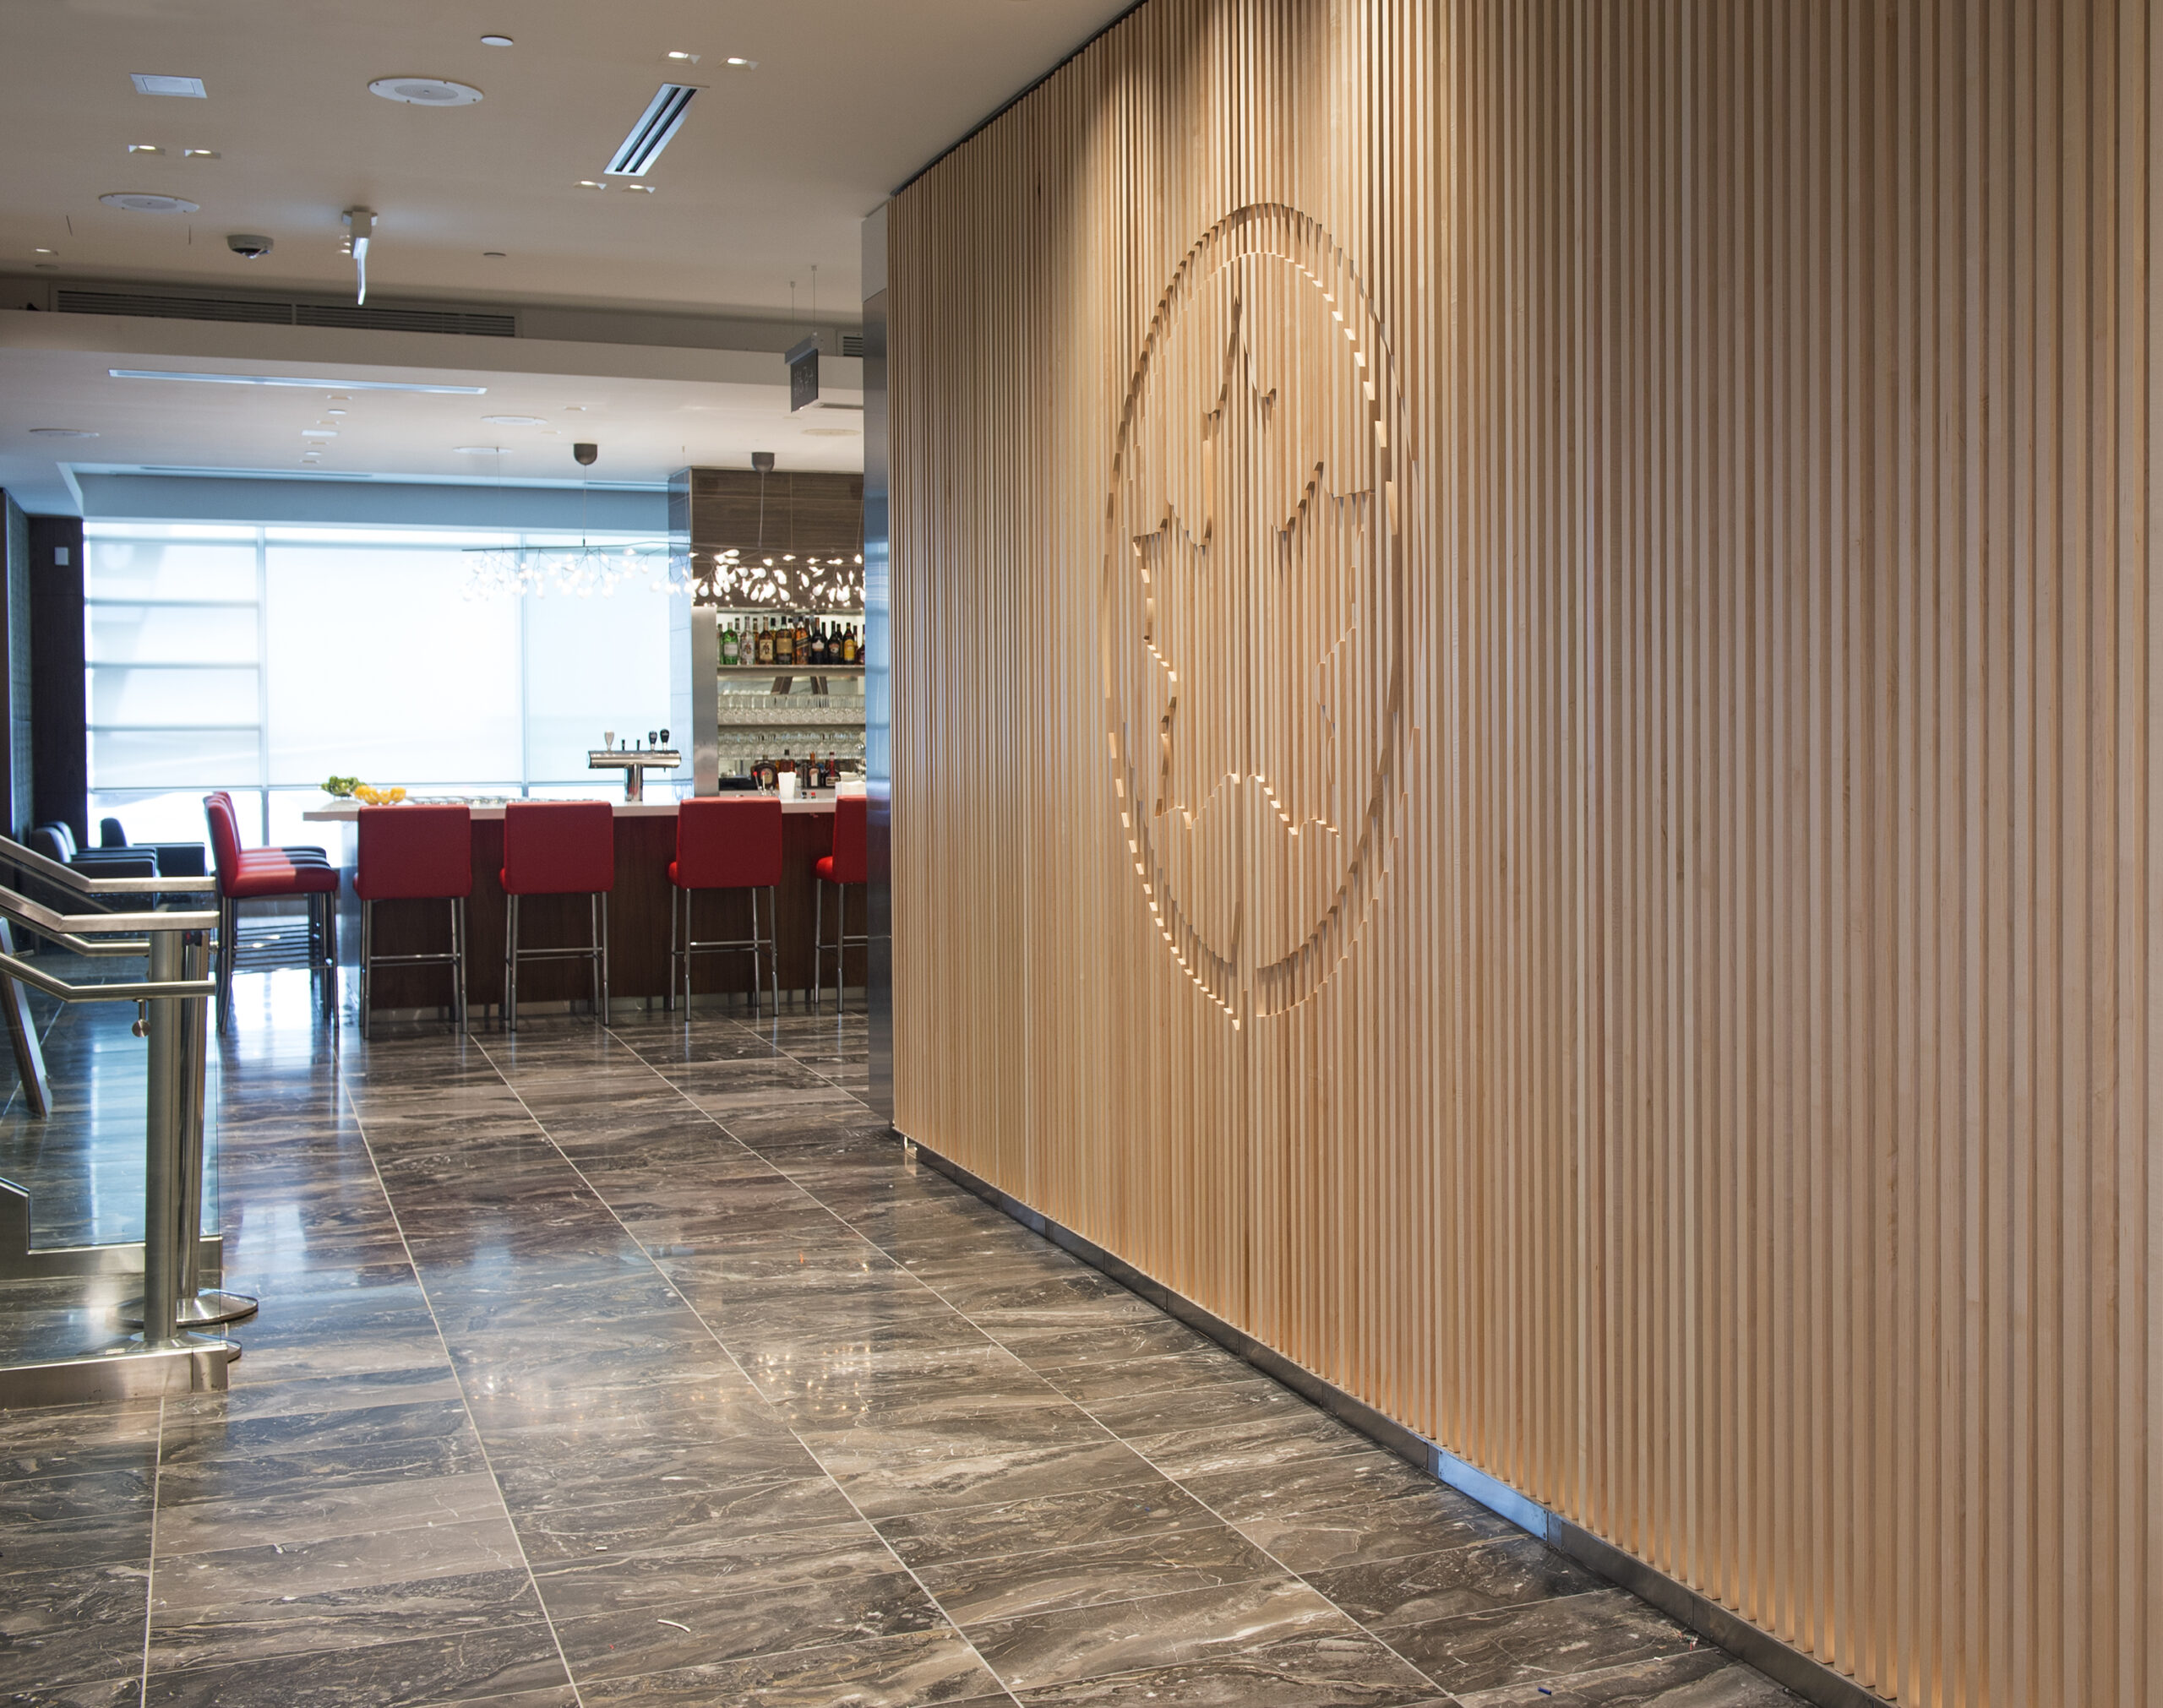 Lounging in Style: Air Canada Revamps Lounge Network